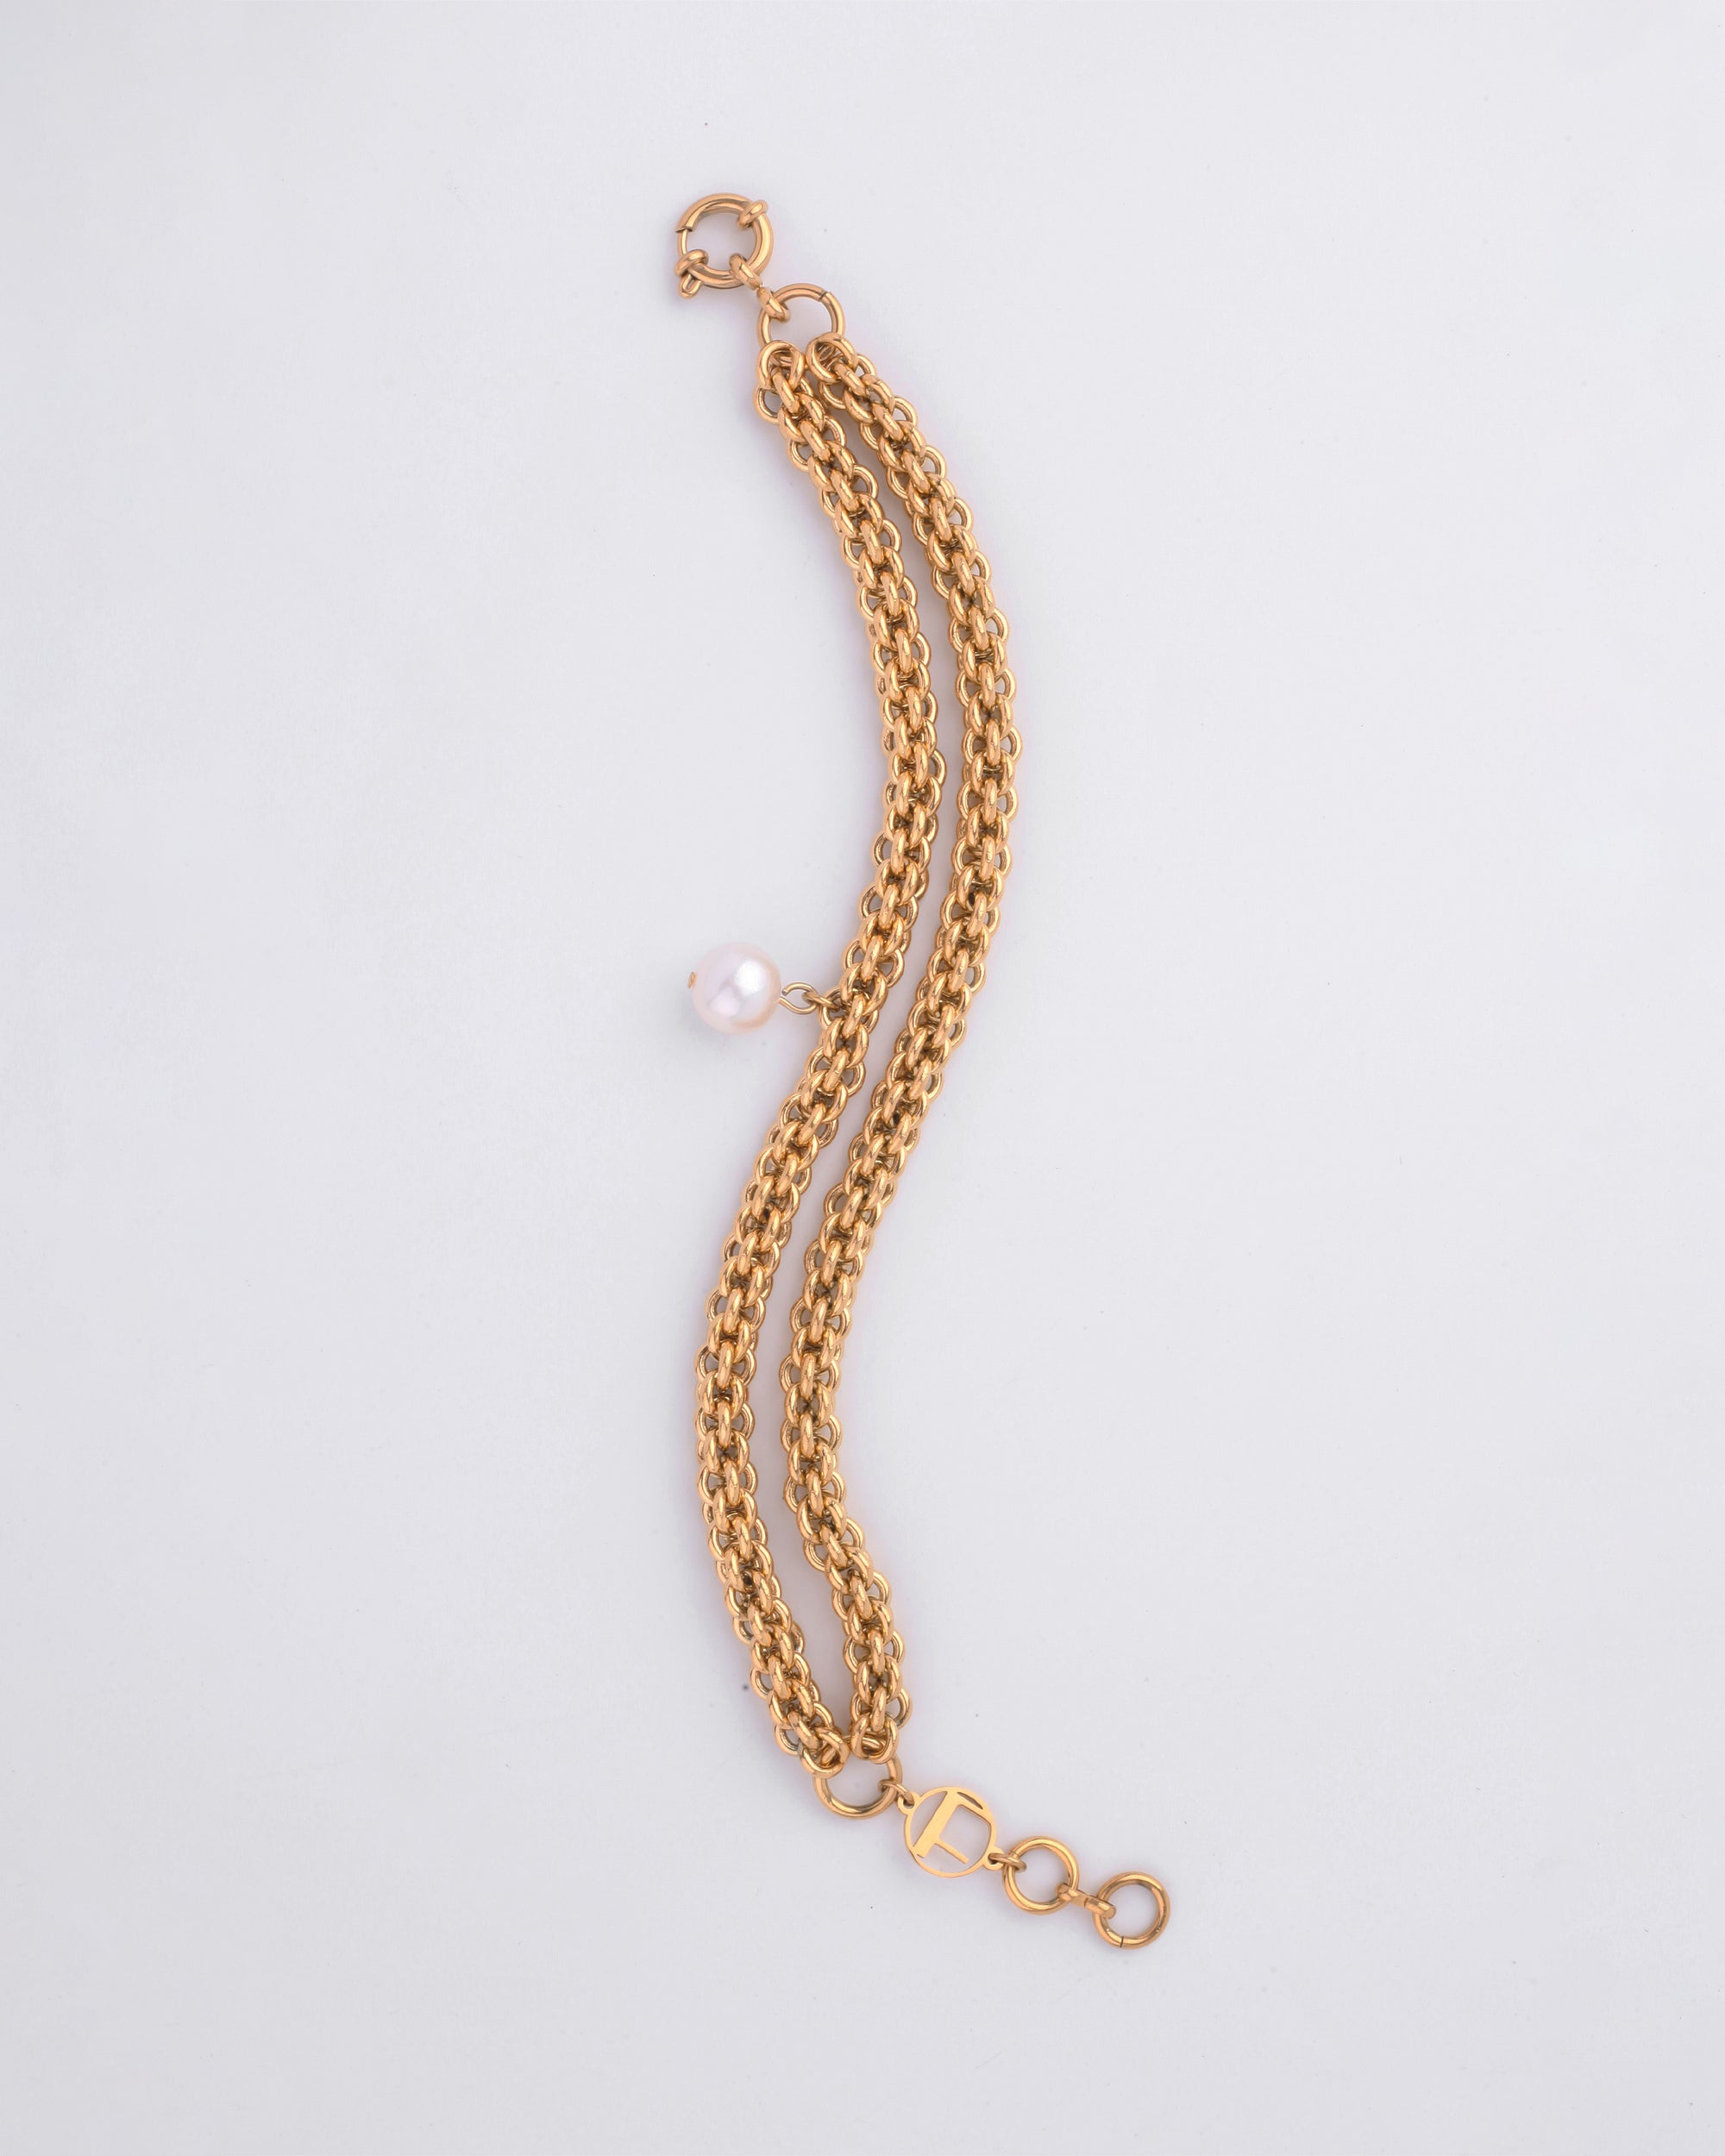 The For Art's Sake® Miller Bracelet features two strands intertwined together. One strand has a single freshwater pearl charm, adding a touch of elegance. The 18kt gold-plated bracelet boasts an adjustable loop segment for sizing and a clasp for fastening, all set against a plain white background.